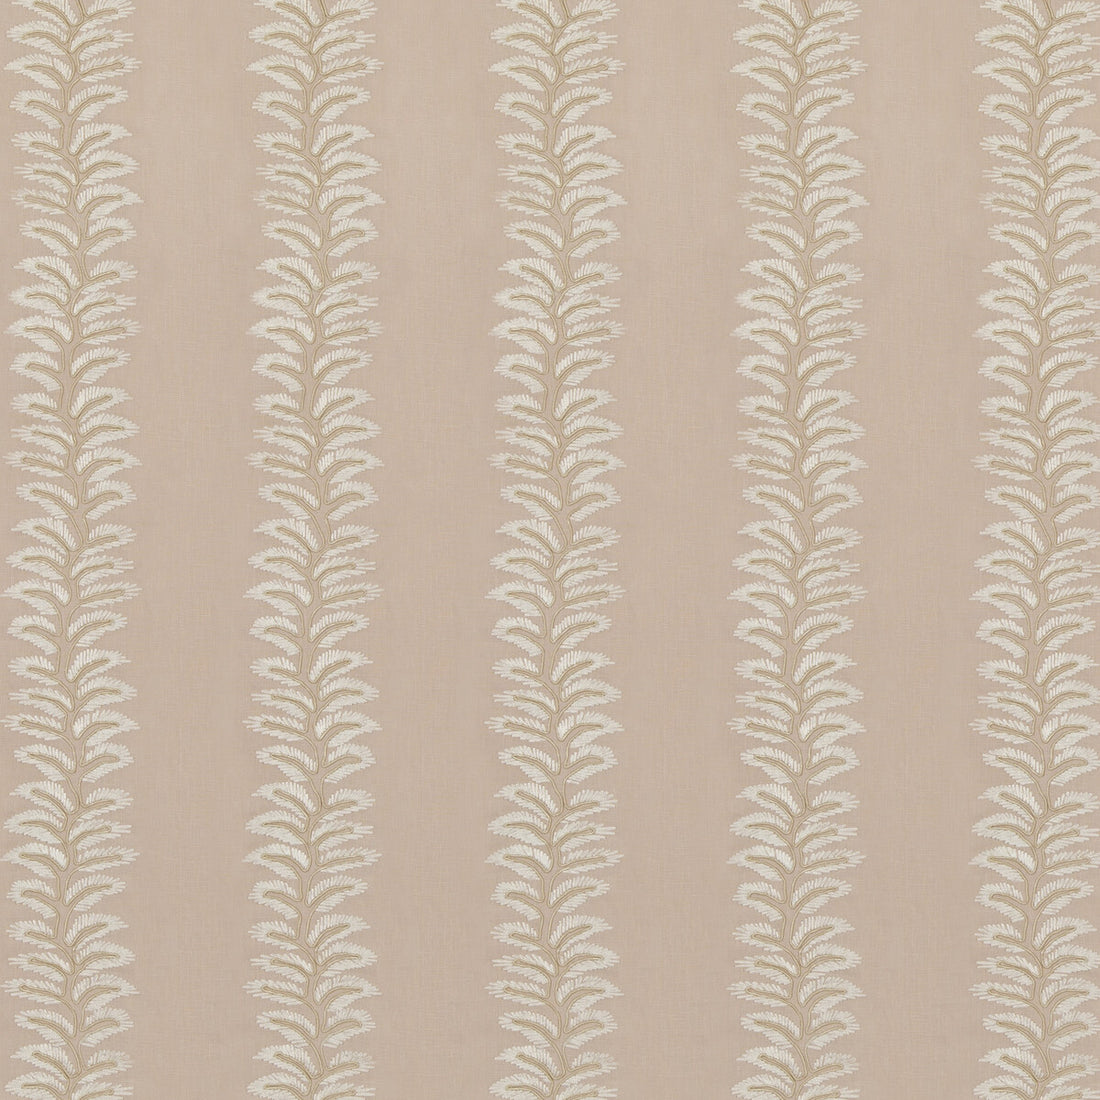 New Bradbourne fabric in blush color - pattern BF10946.440.0 - by G P &amp; J Baker in the Ashmore collection